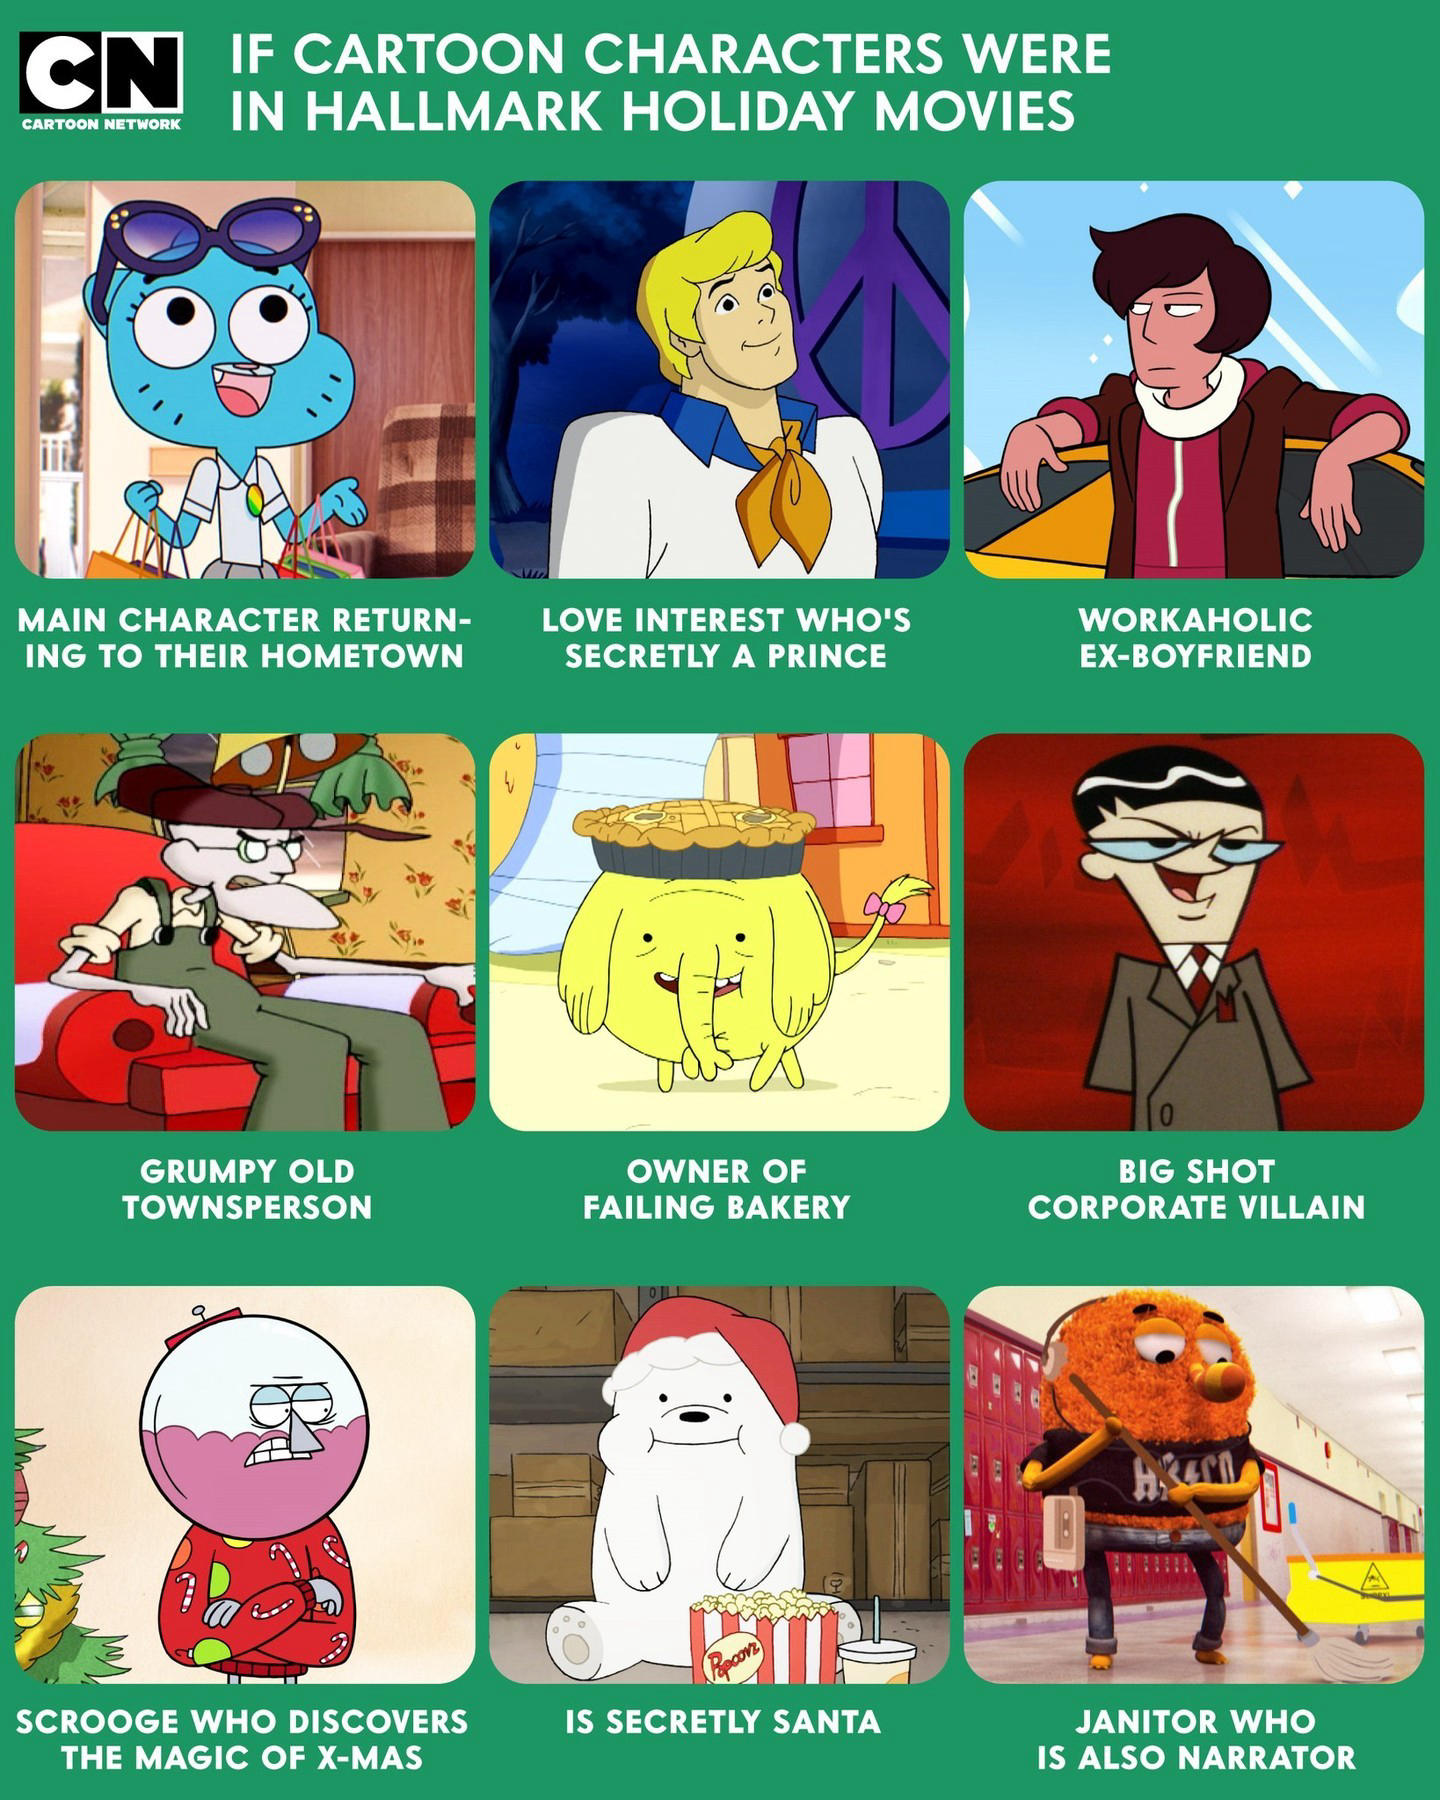 Cartoon Network - We'd watch the heck outta this movie